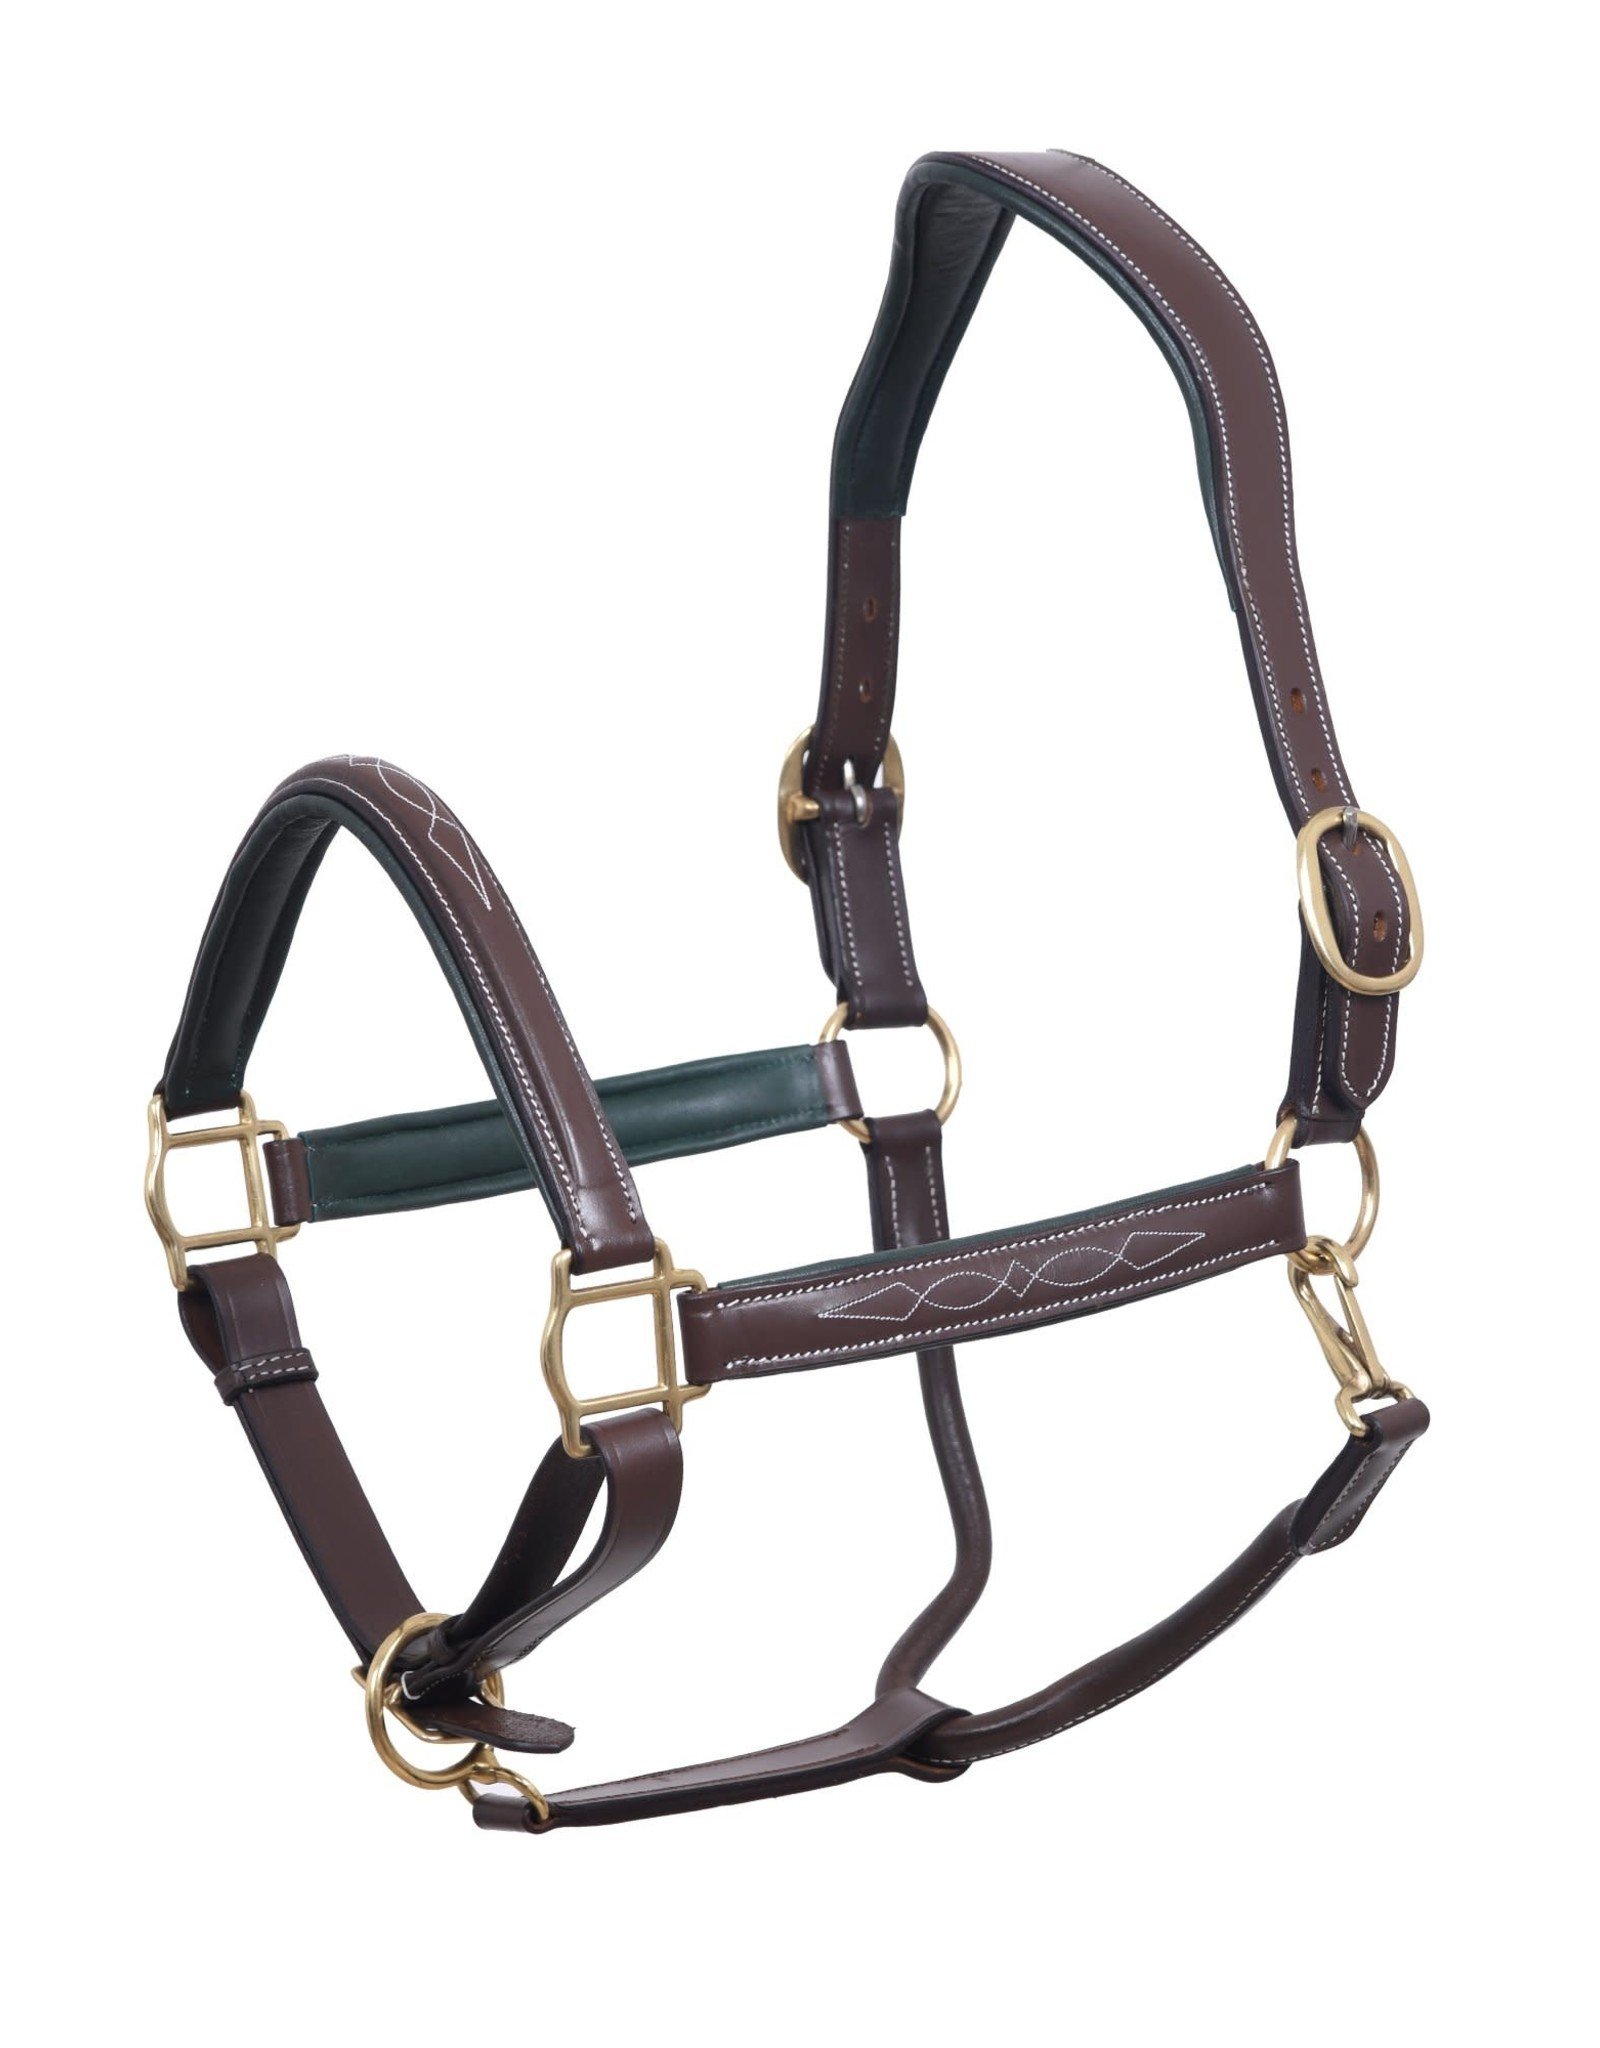 PUP & PONY CO BELMONT COLLECTION ANATOMICAL HALTER